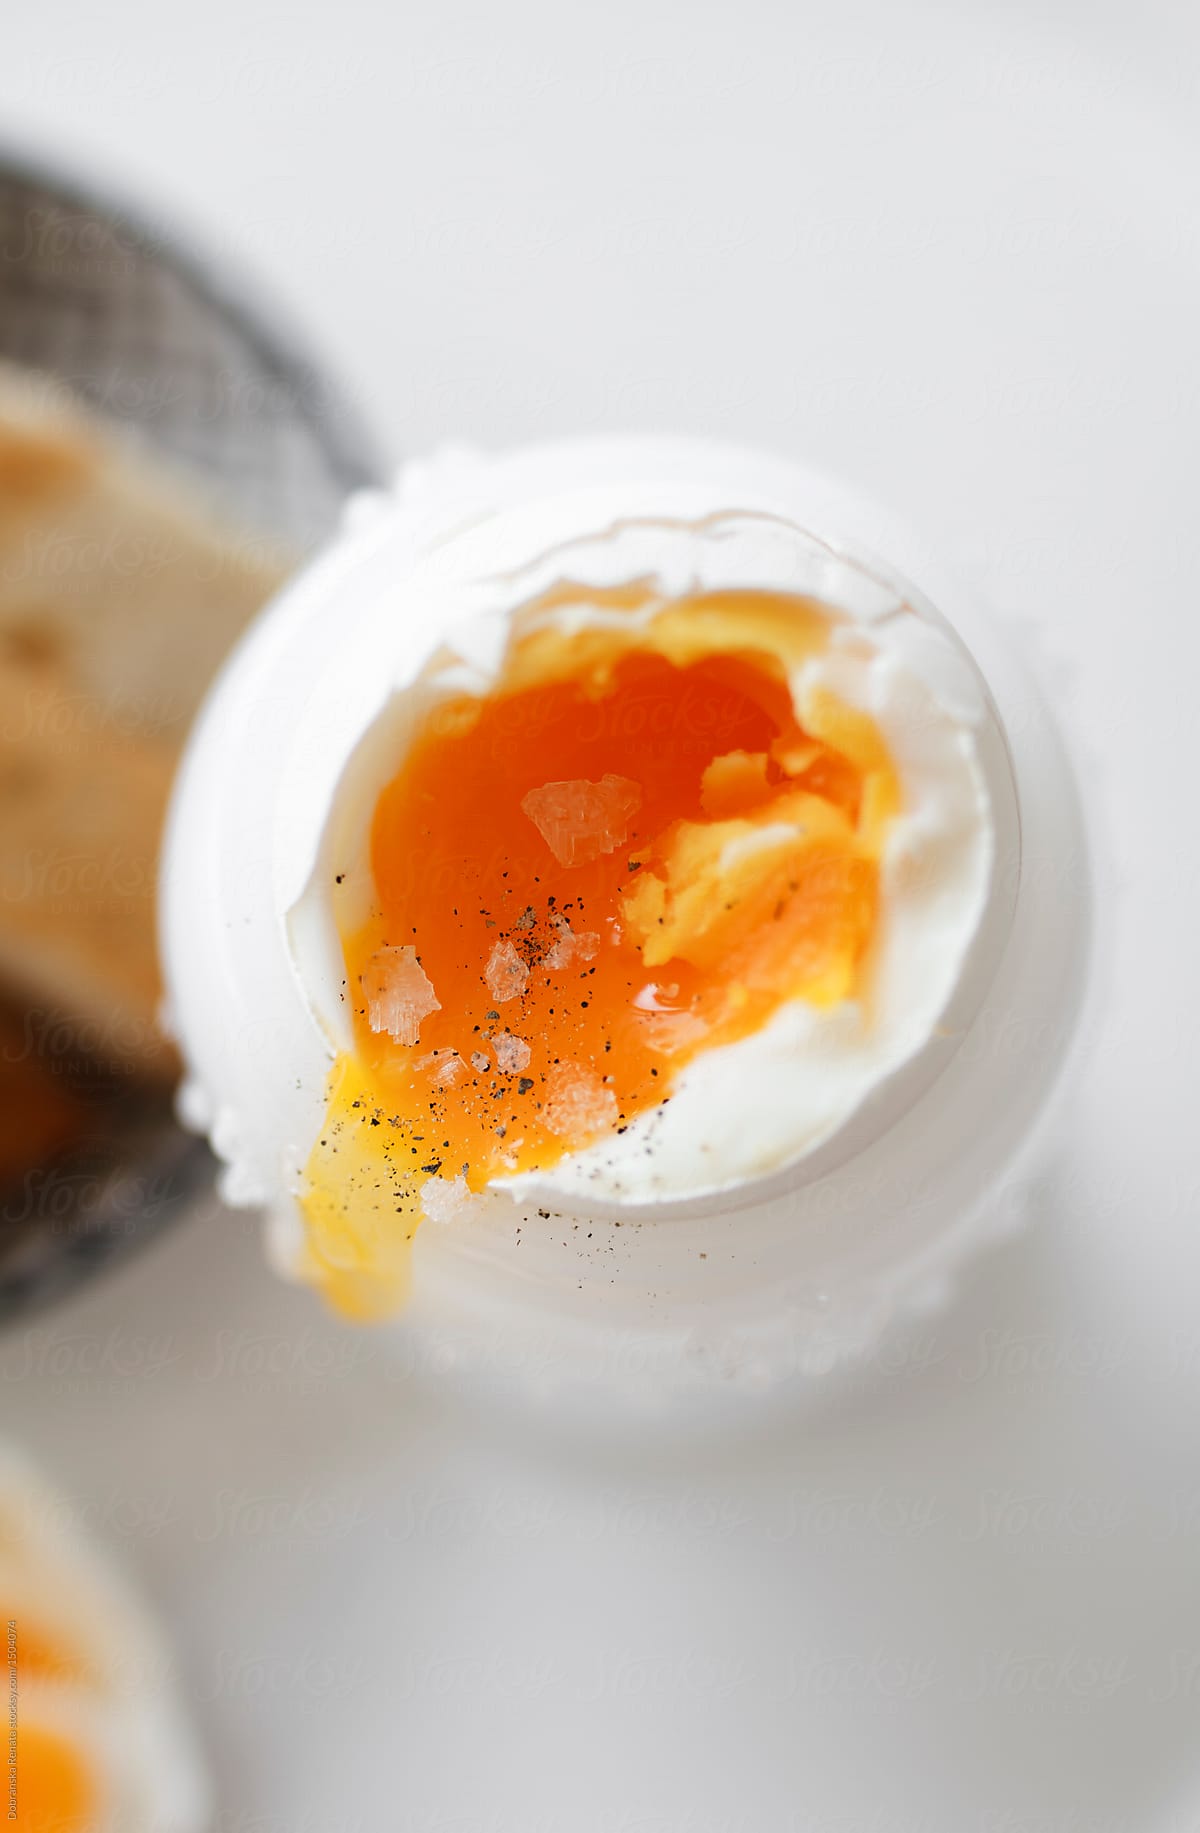 A soft-boiled egg with toast soldiers.